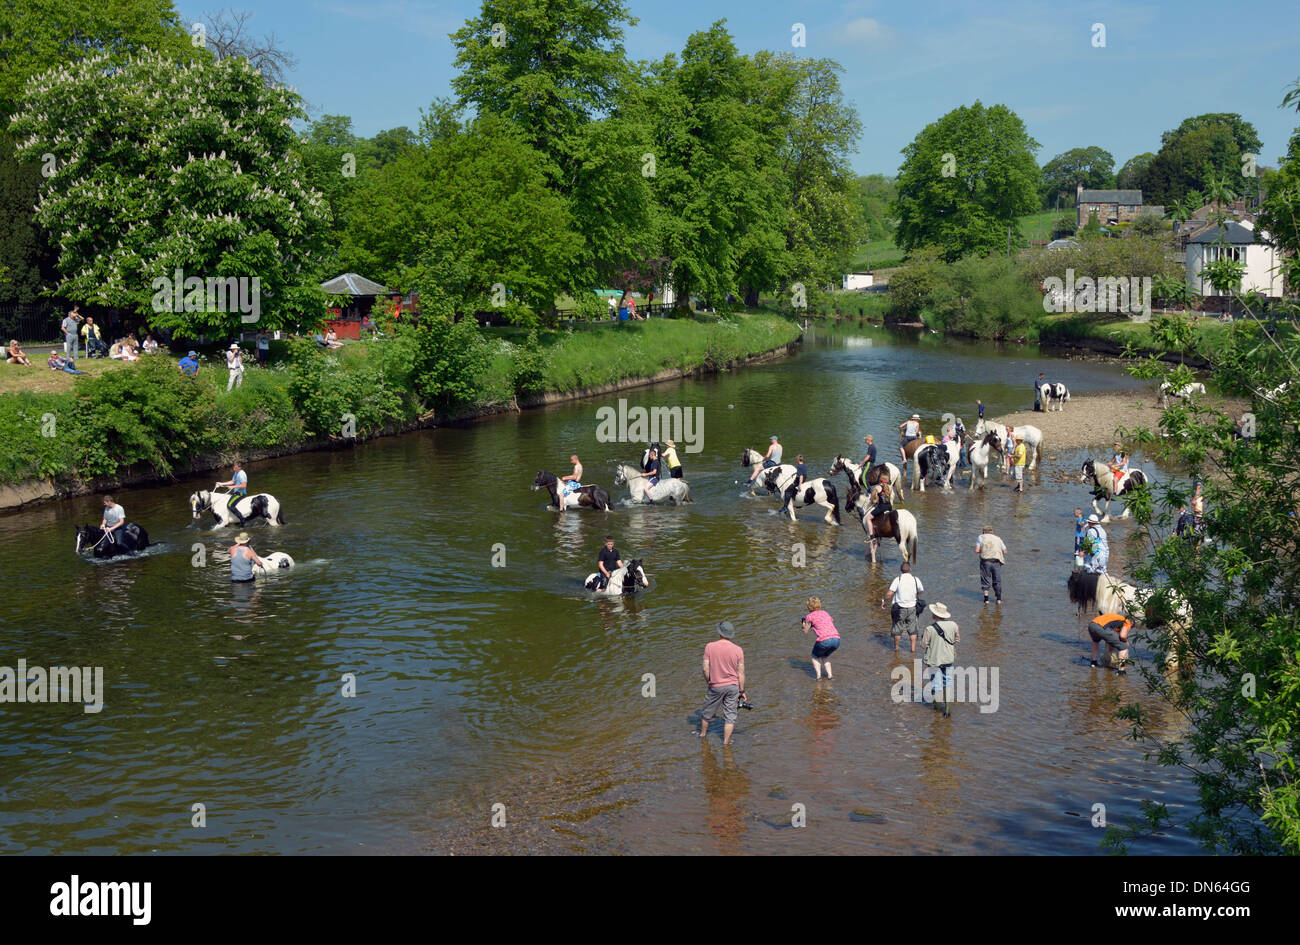 Gypsy travellers with horses in River Eden. Appleby Horse Fair, Appleby-in-Westmorland, Cumbria, England, United Kingdom, Europe Stock Photo